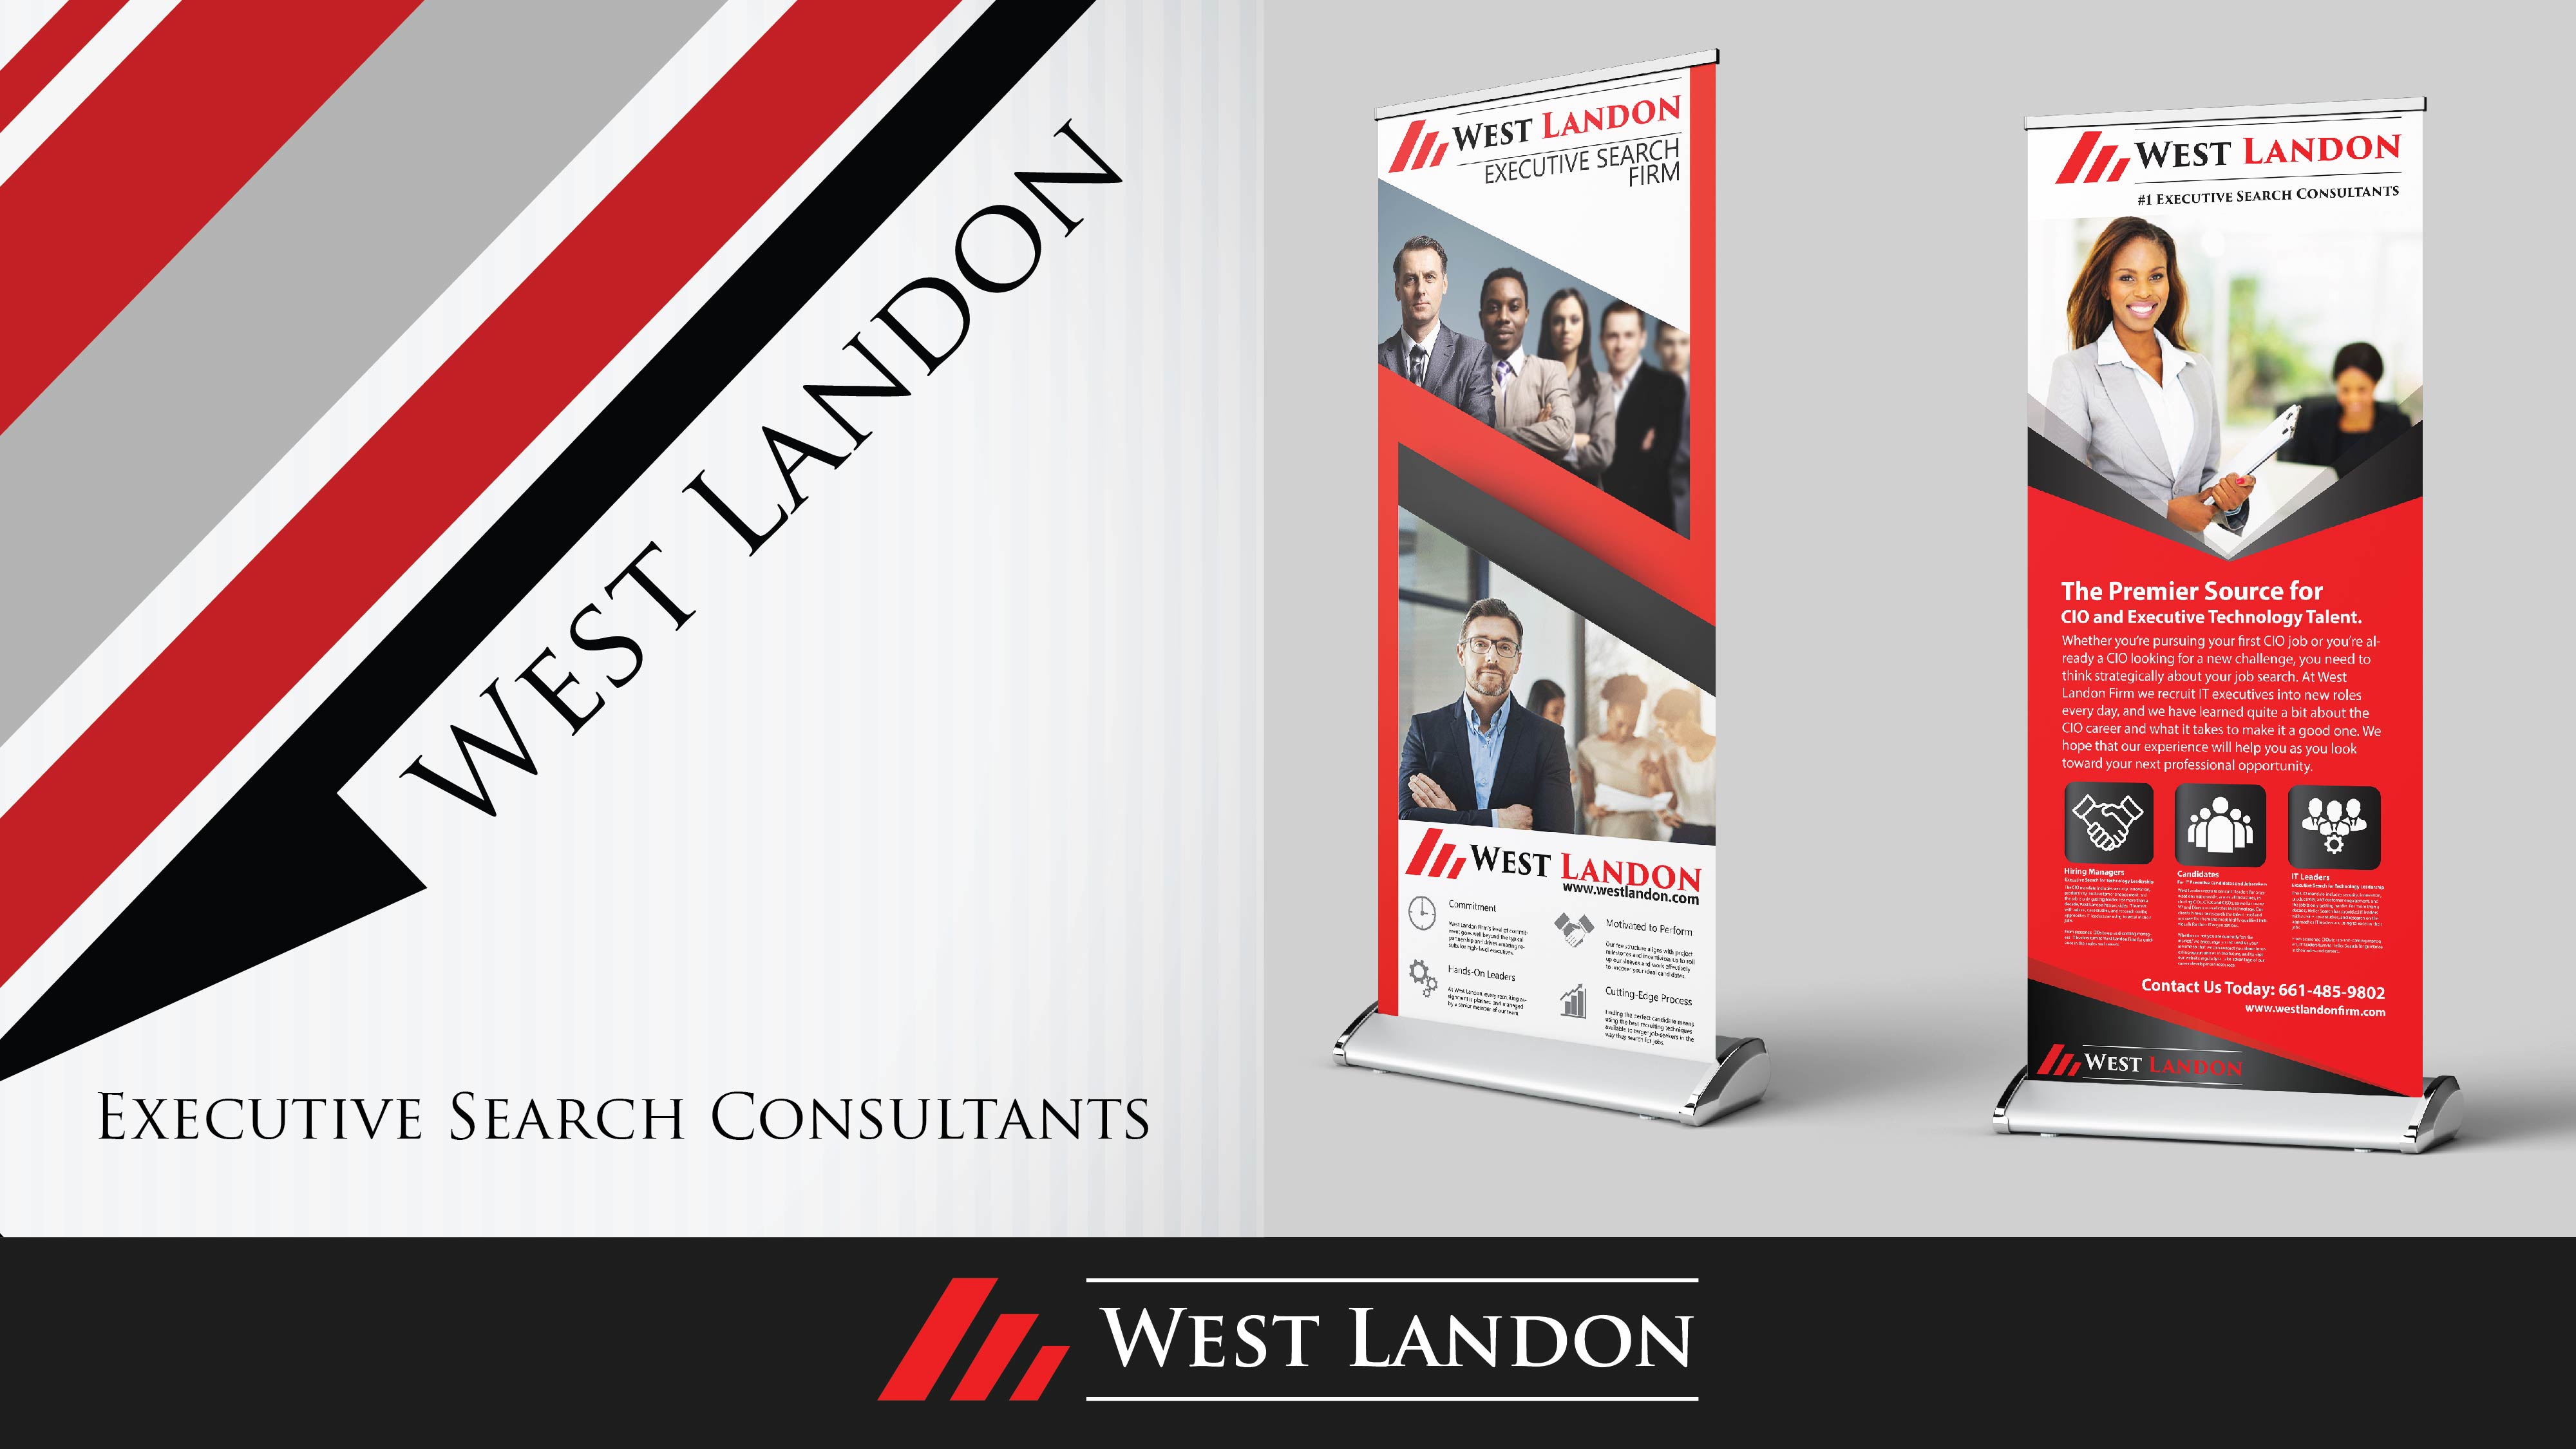 West Landon logo on a red, white, black, and gray background with banners on each side.